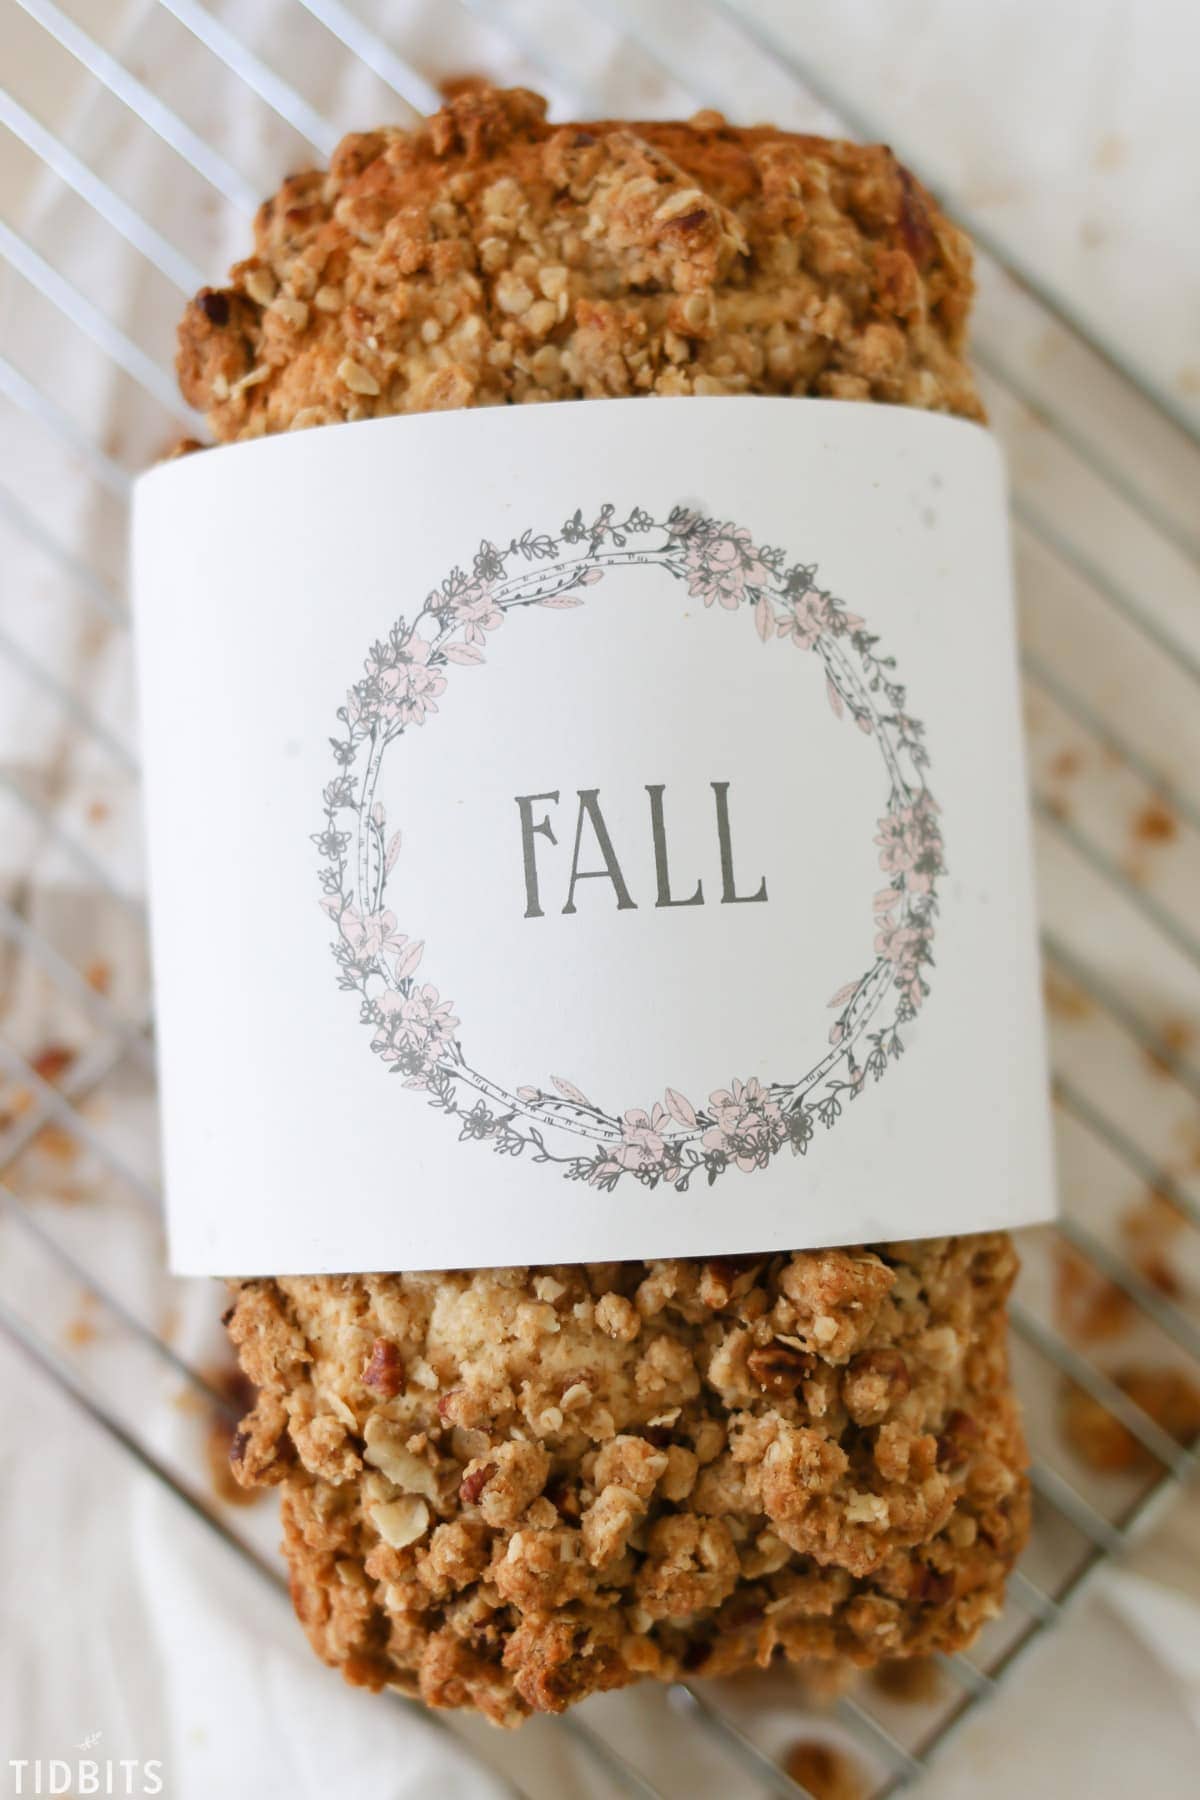 Bread Wrap Free Printable. Perfect for Fall baking and gifting!